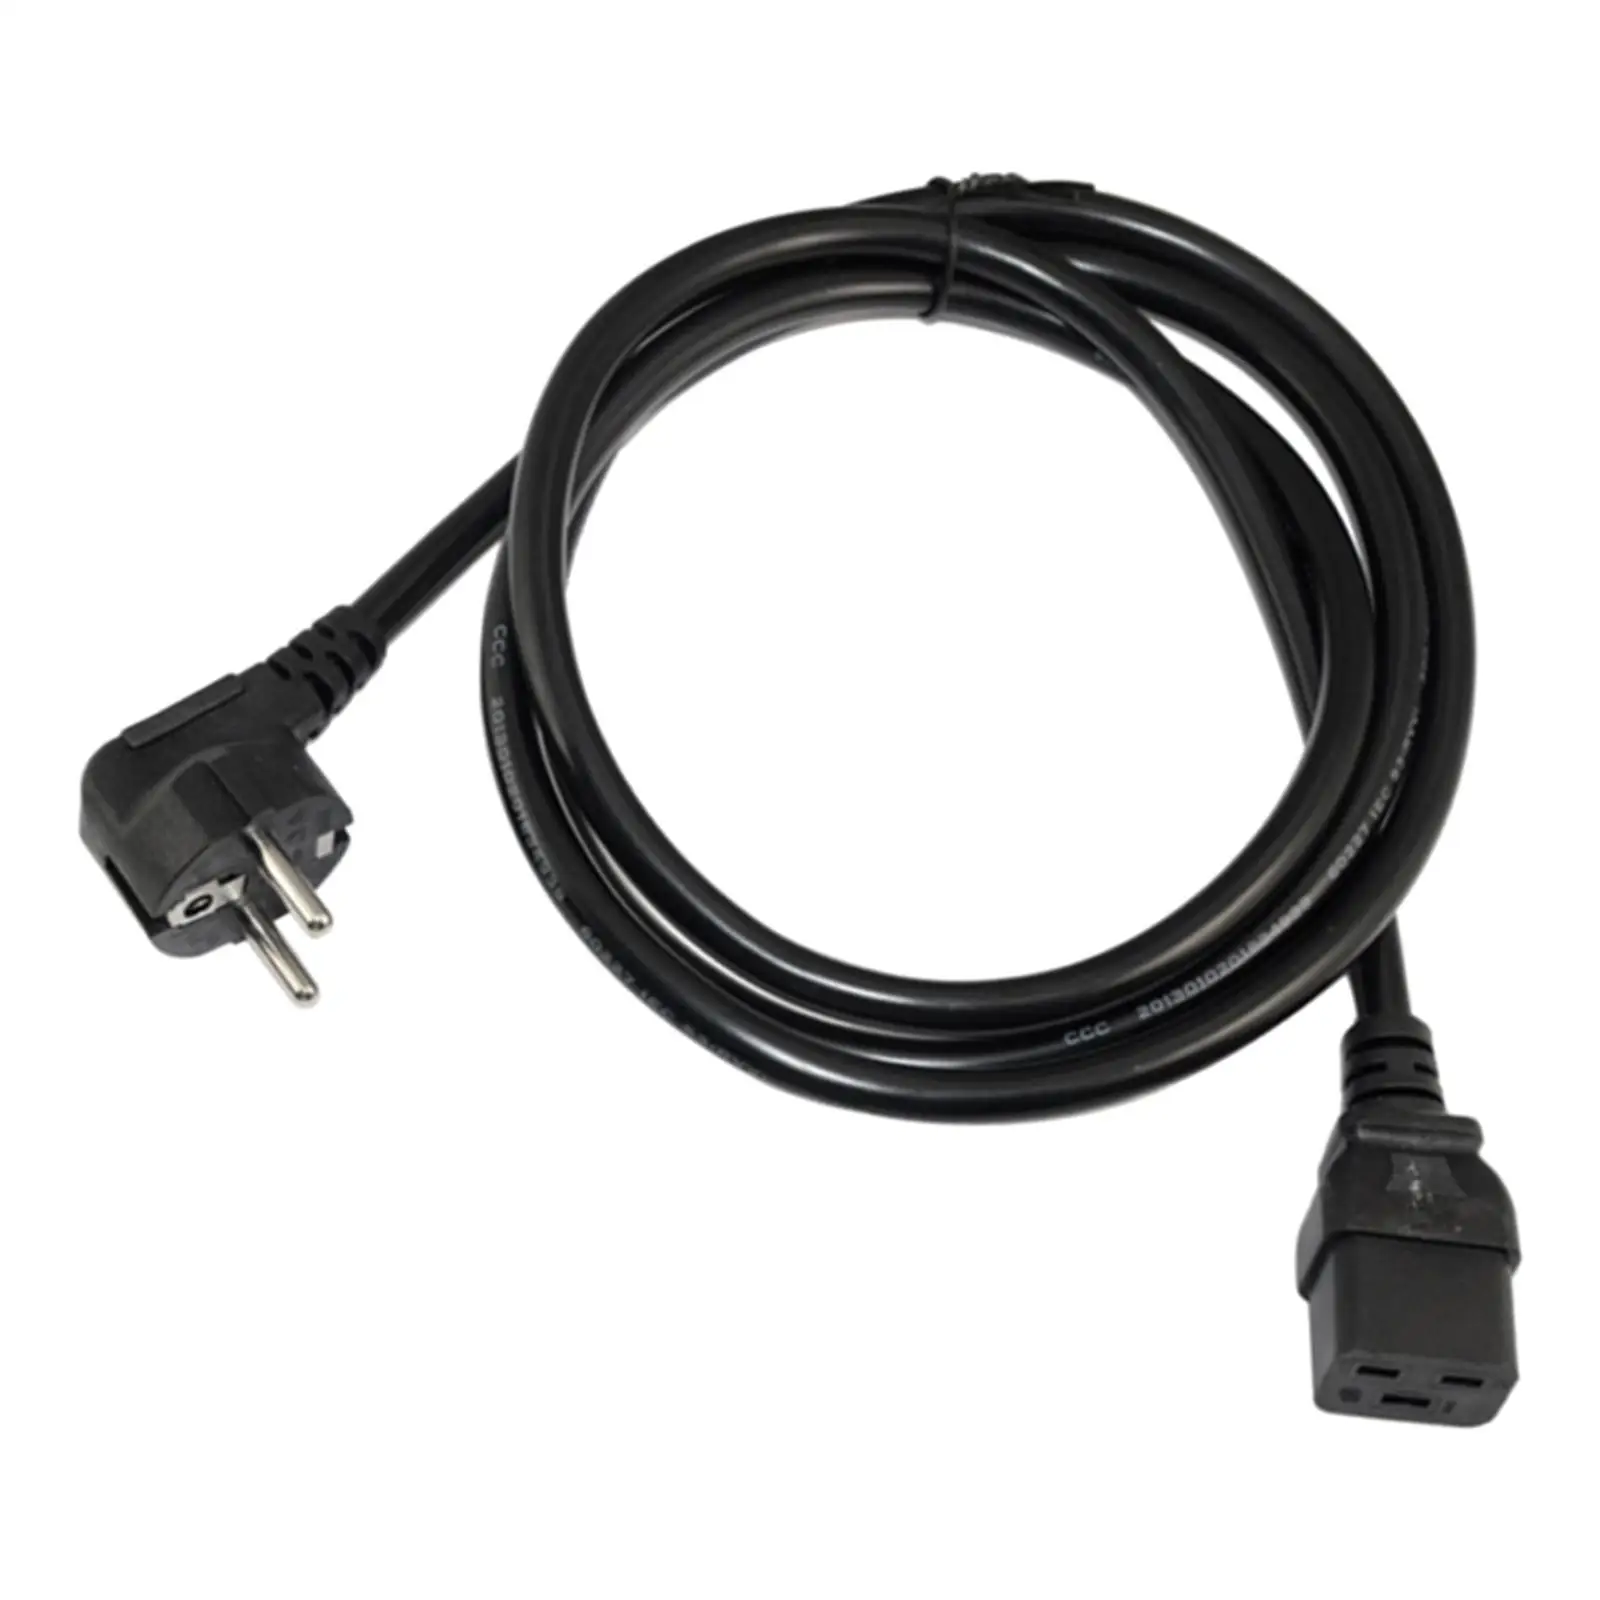 European to C19 Power Cords good Conductivity Power Extension Cable Laptop Adapter